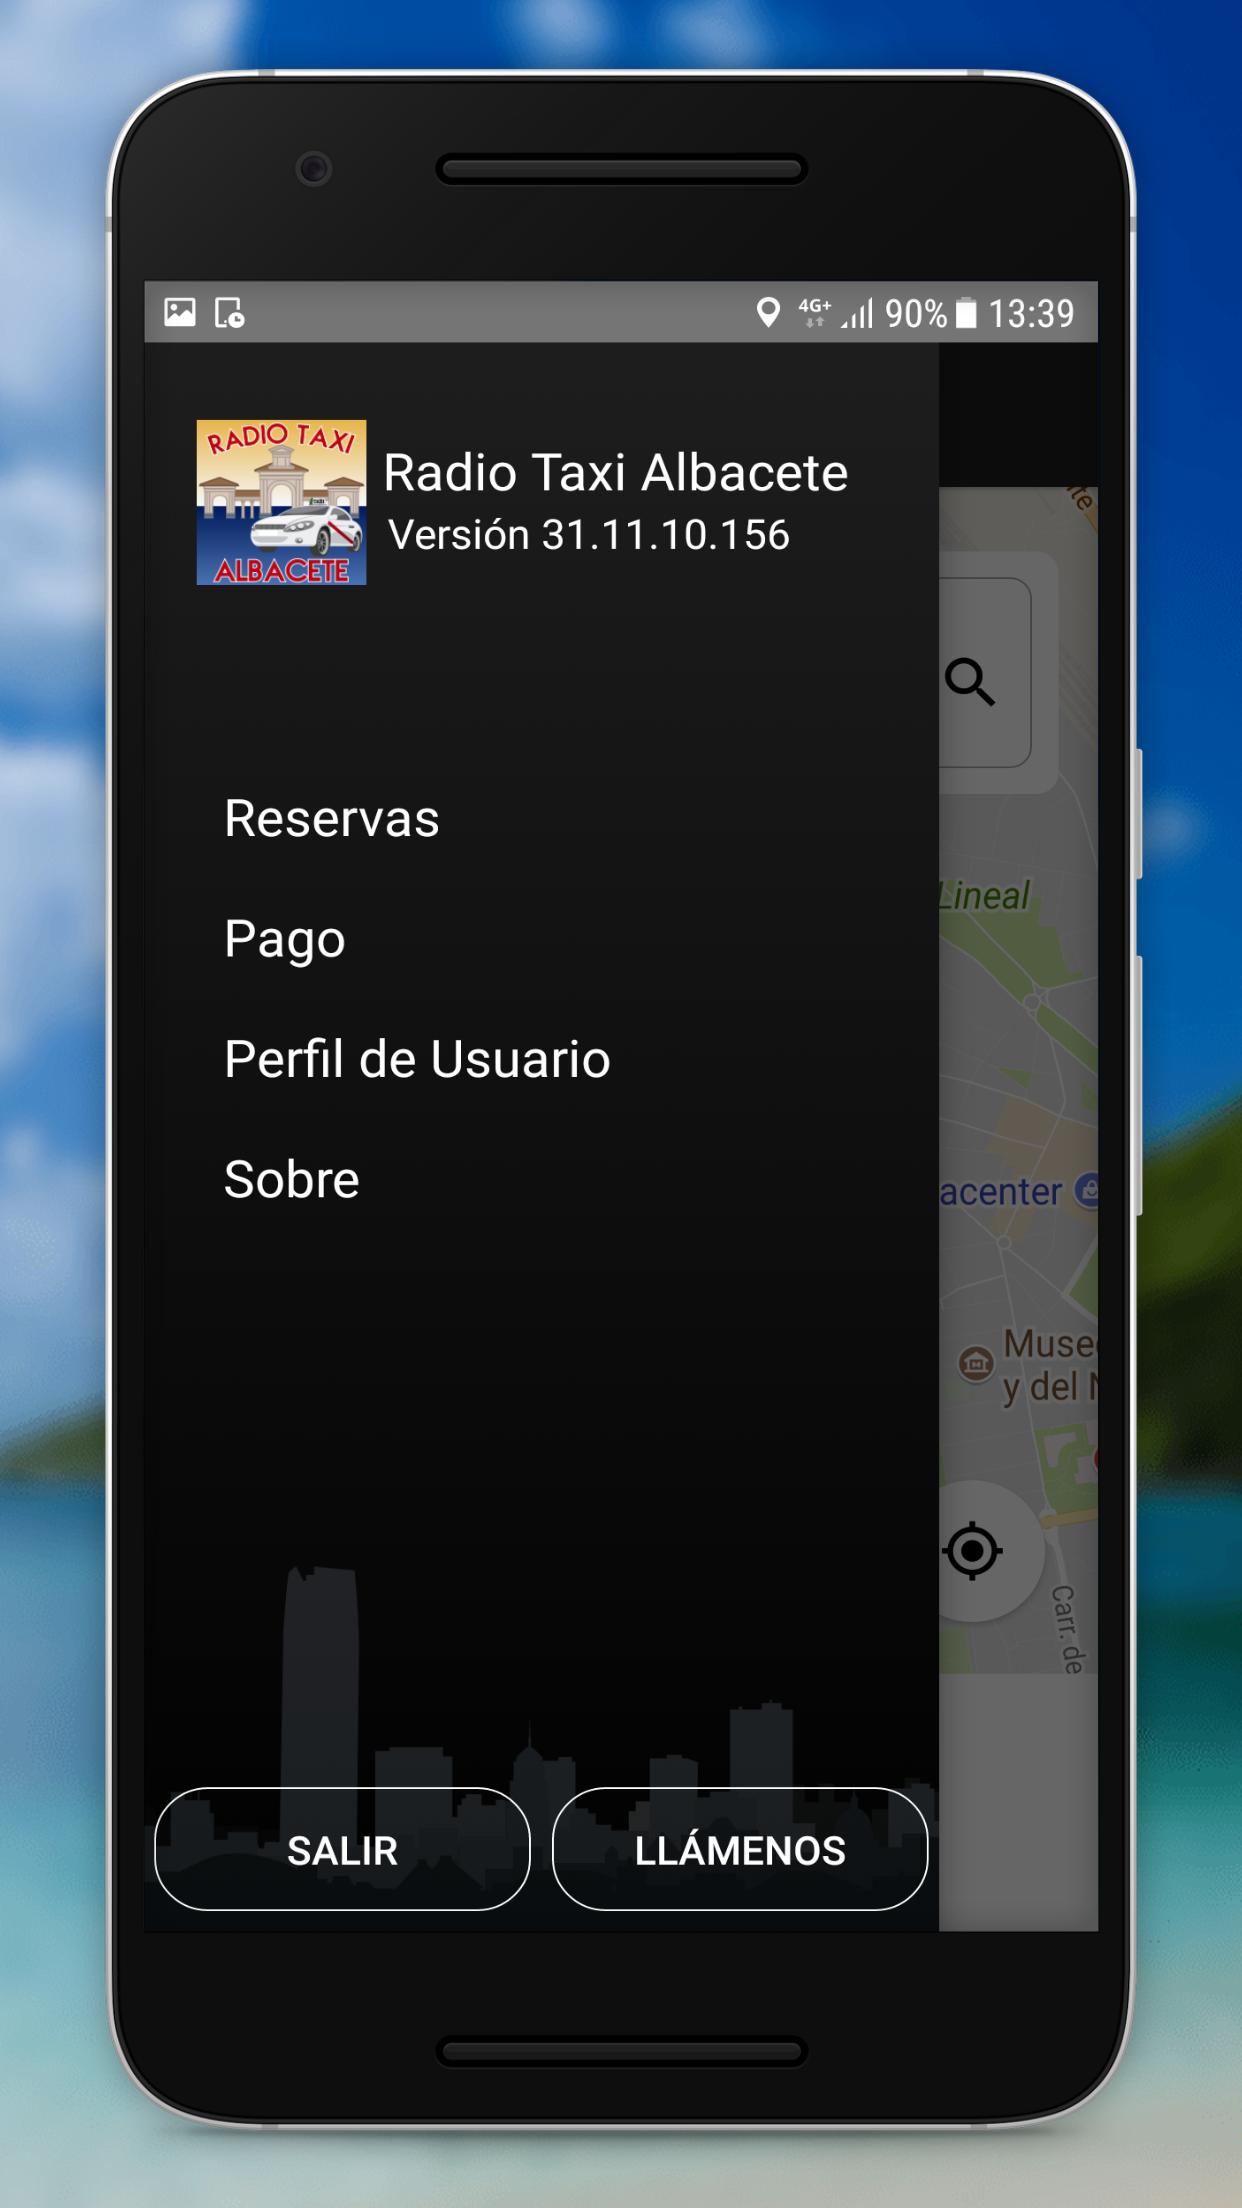 Radio Taxi Albacete for Android - APK Download